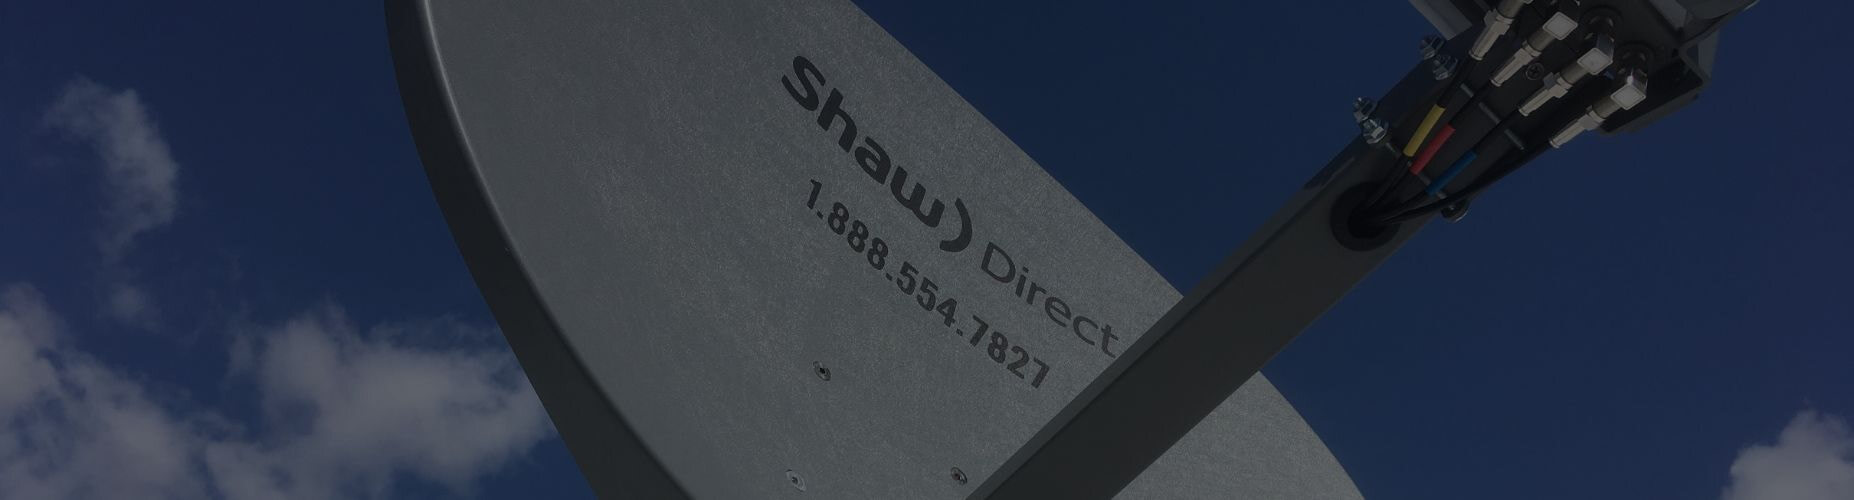 Attention Shaw Direct Winegard Users!